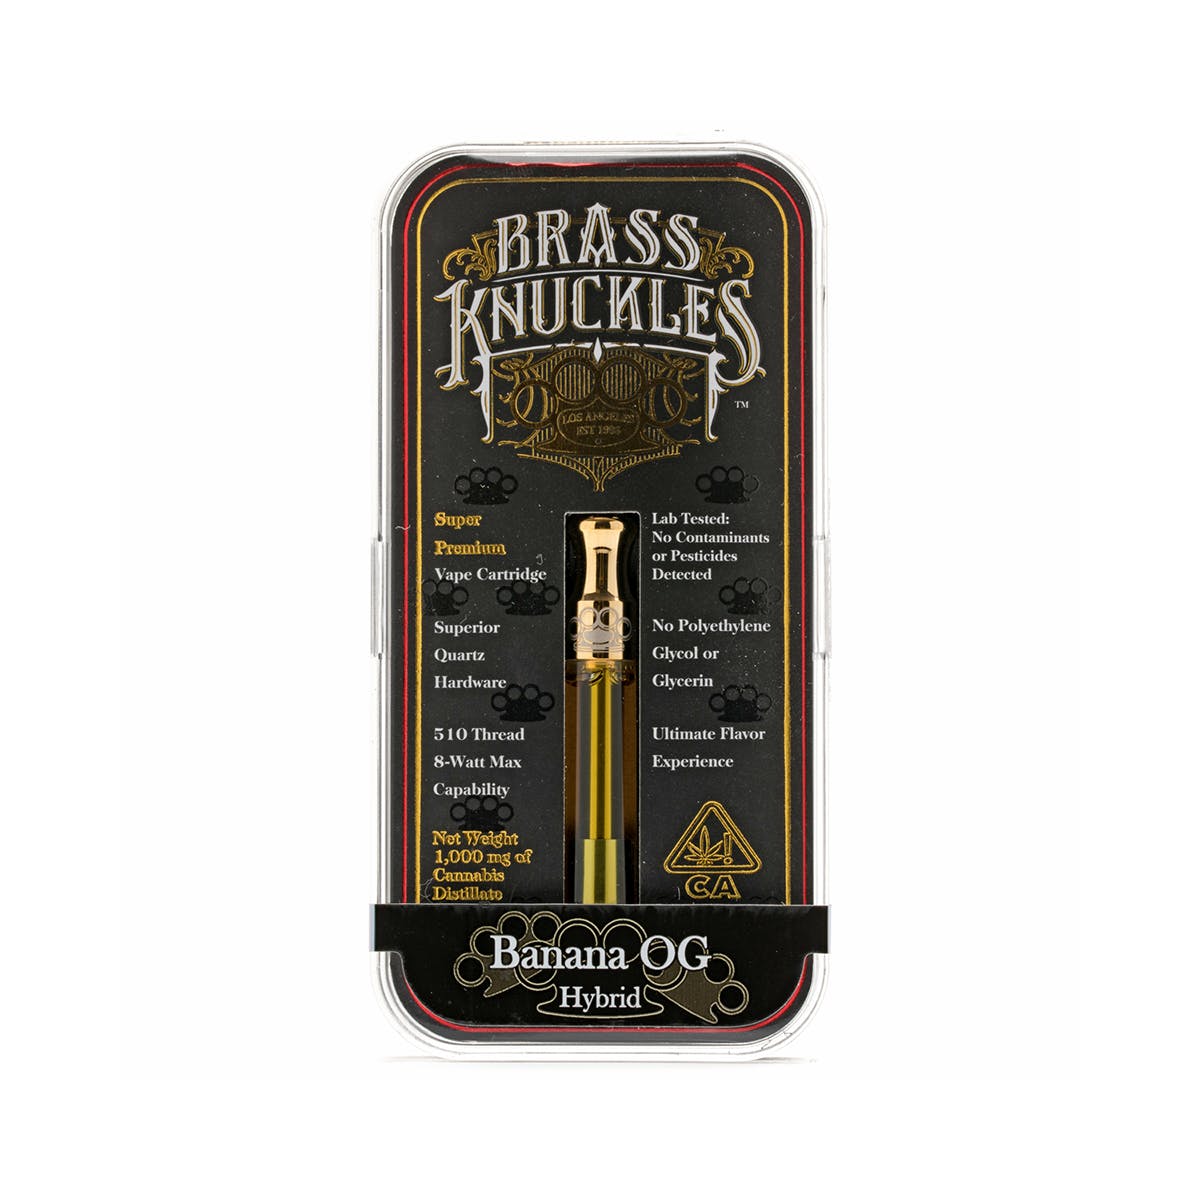 BRASS KNUCKLES🥵
Brass Knuckles is a Cali brand known for their premium cannabis oil cartridges that are rich in flavor, thanks to their masterful extraction process😍🍁🔥 . Get yours today #brassknuckles #cartsdaily #dabsdaily #wax #concentrate #hybrid #indica #sativs